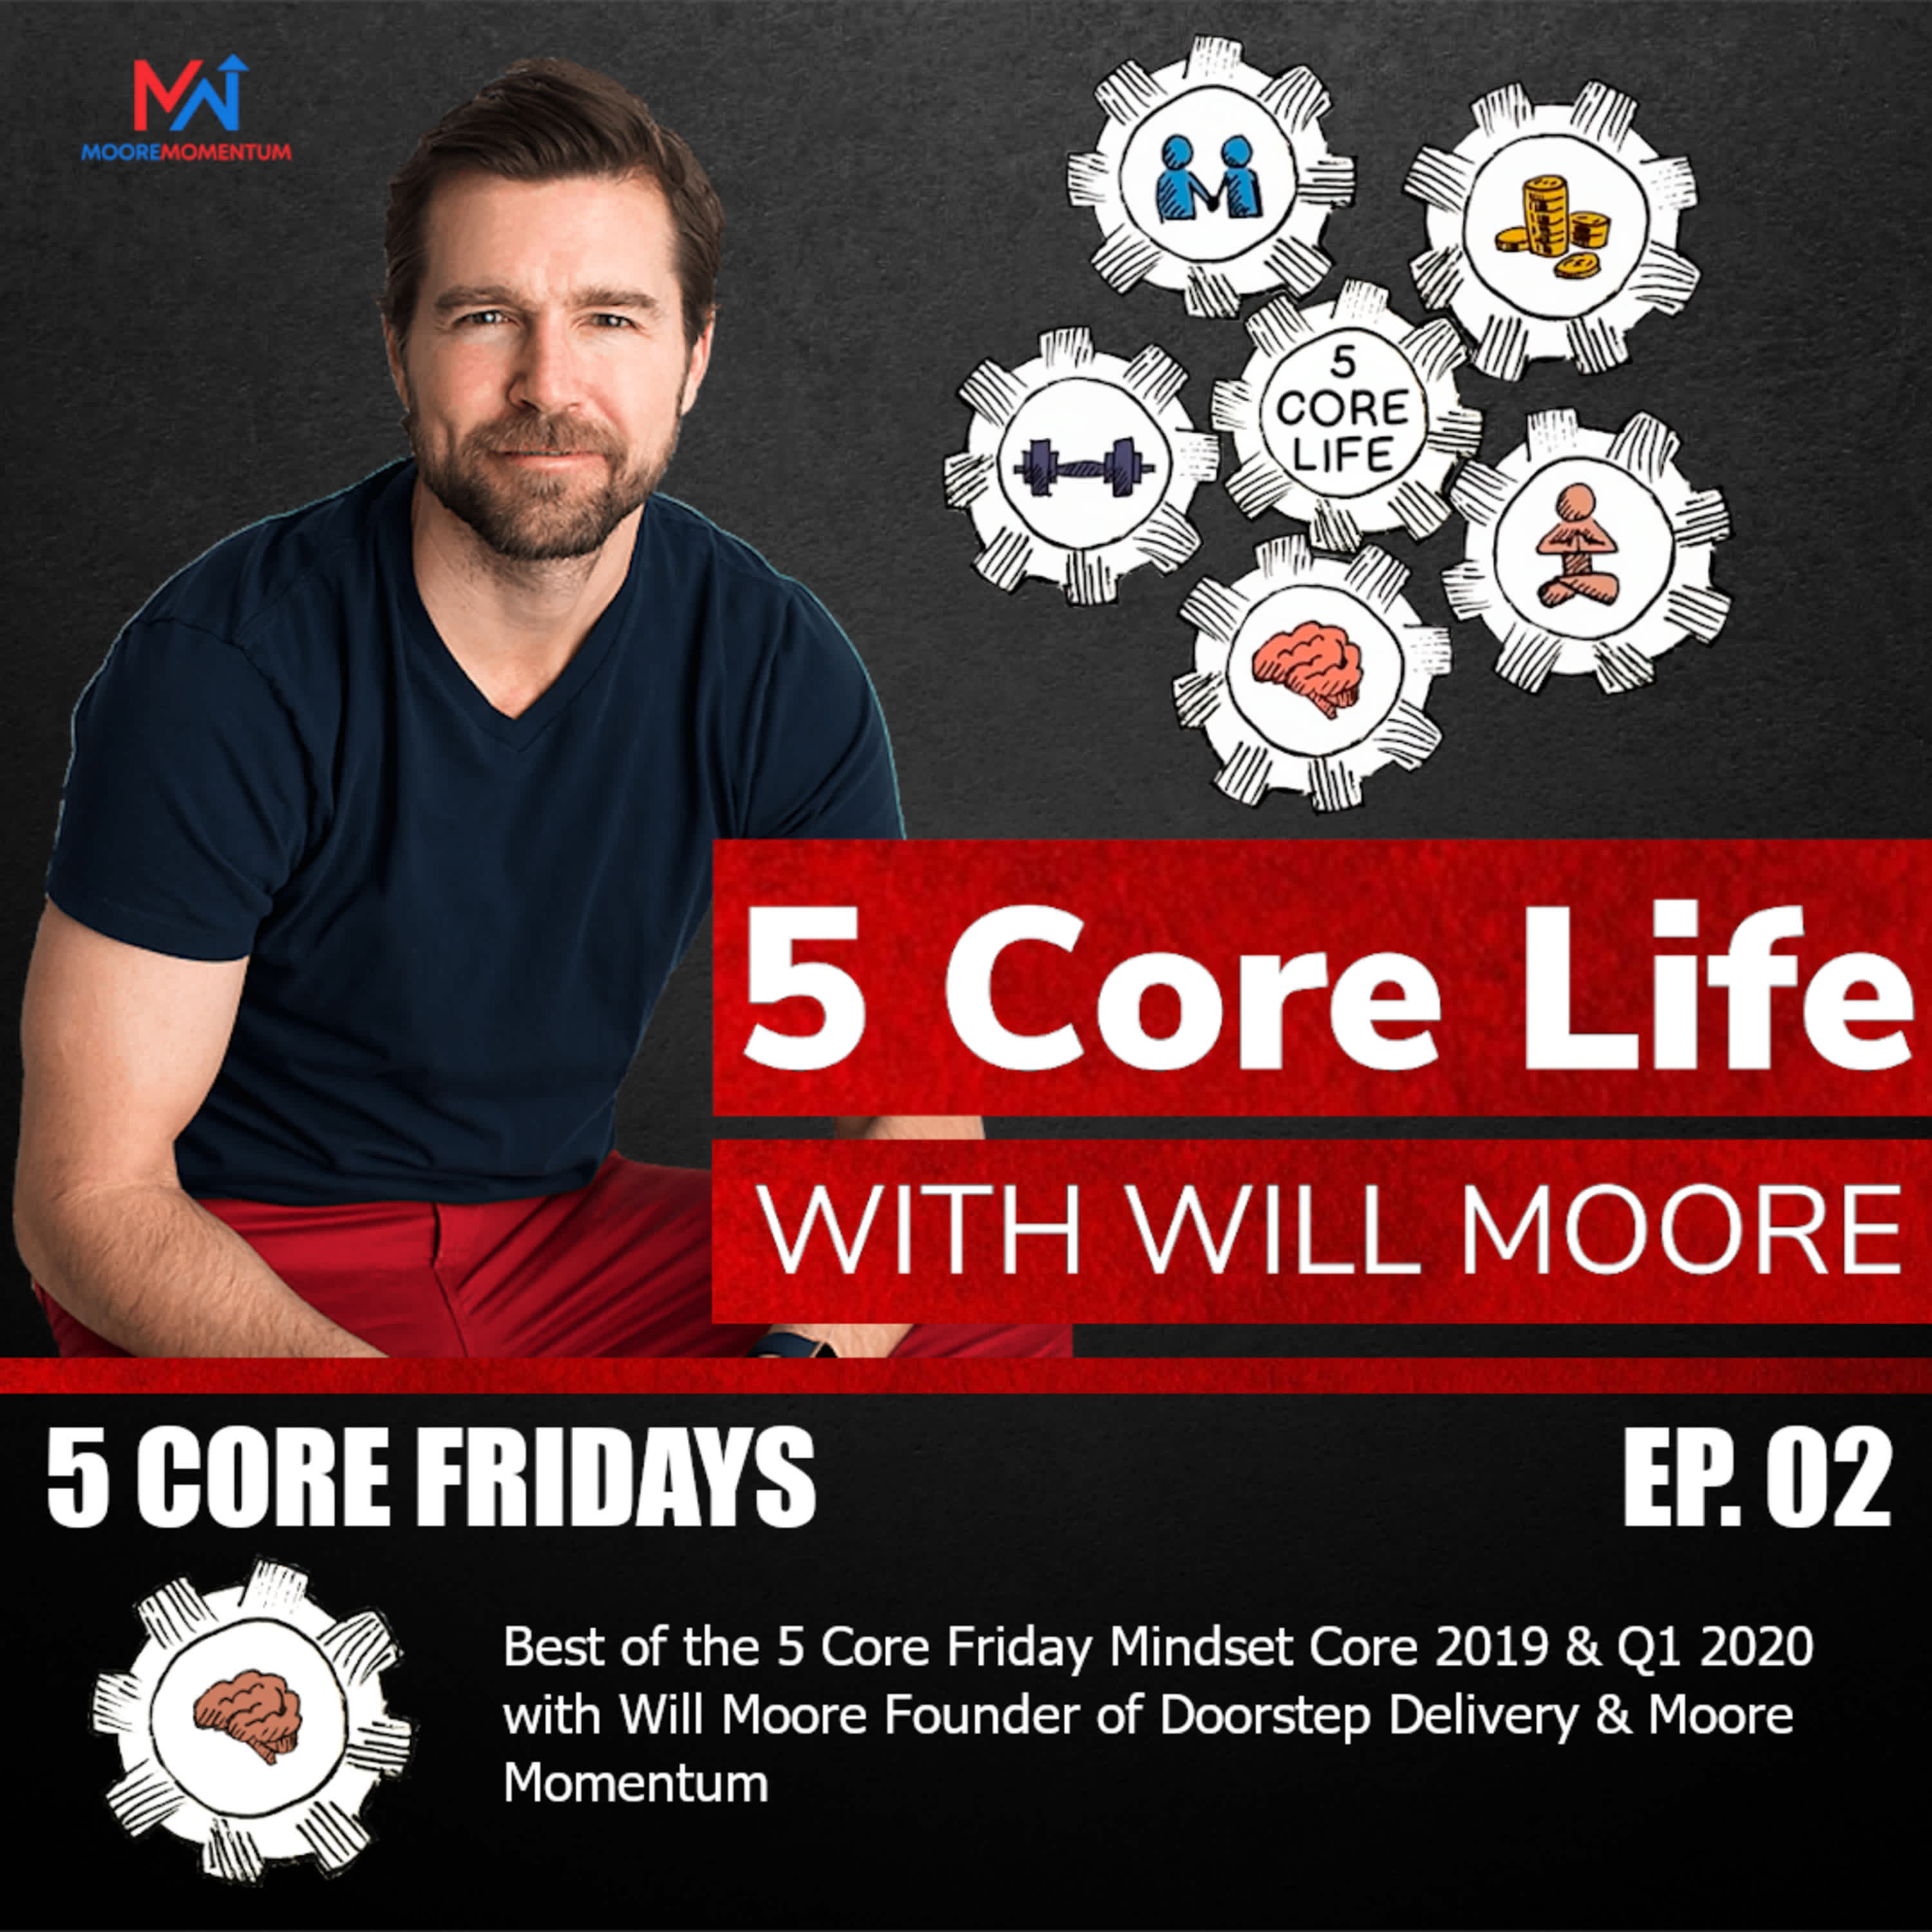 Best of the 5 Core Friday Mindset Core 2019 & Q1 2020 with Will Moore Founder of Doorstep Delivery & Moore Momentum